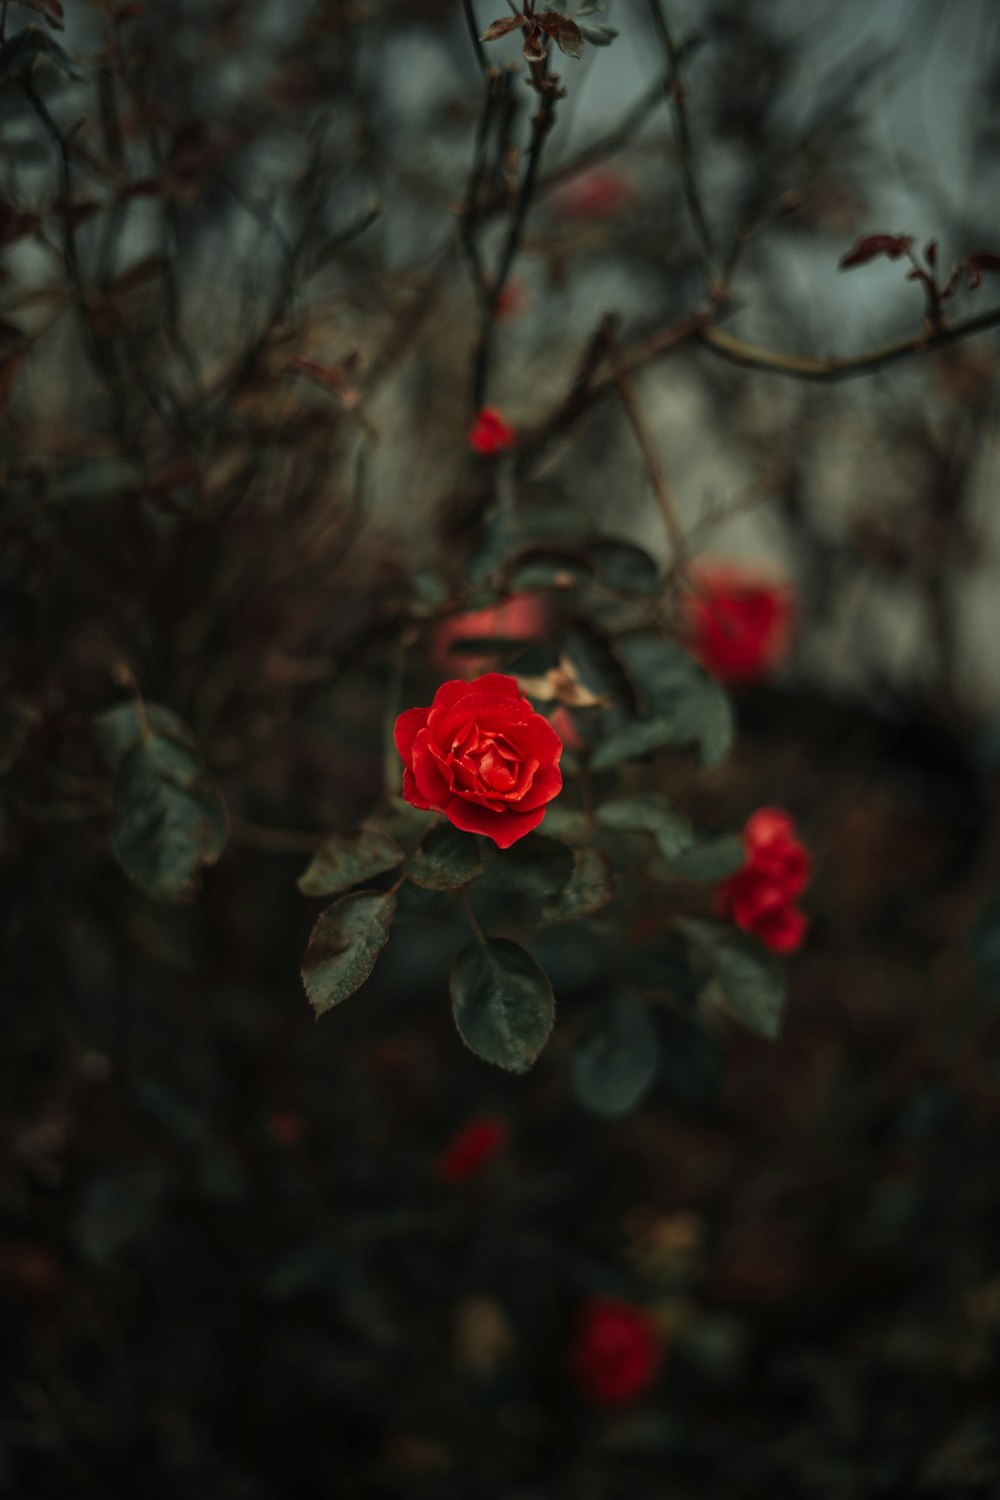 a red rose is blooming on a tree branch